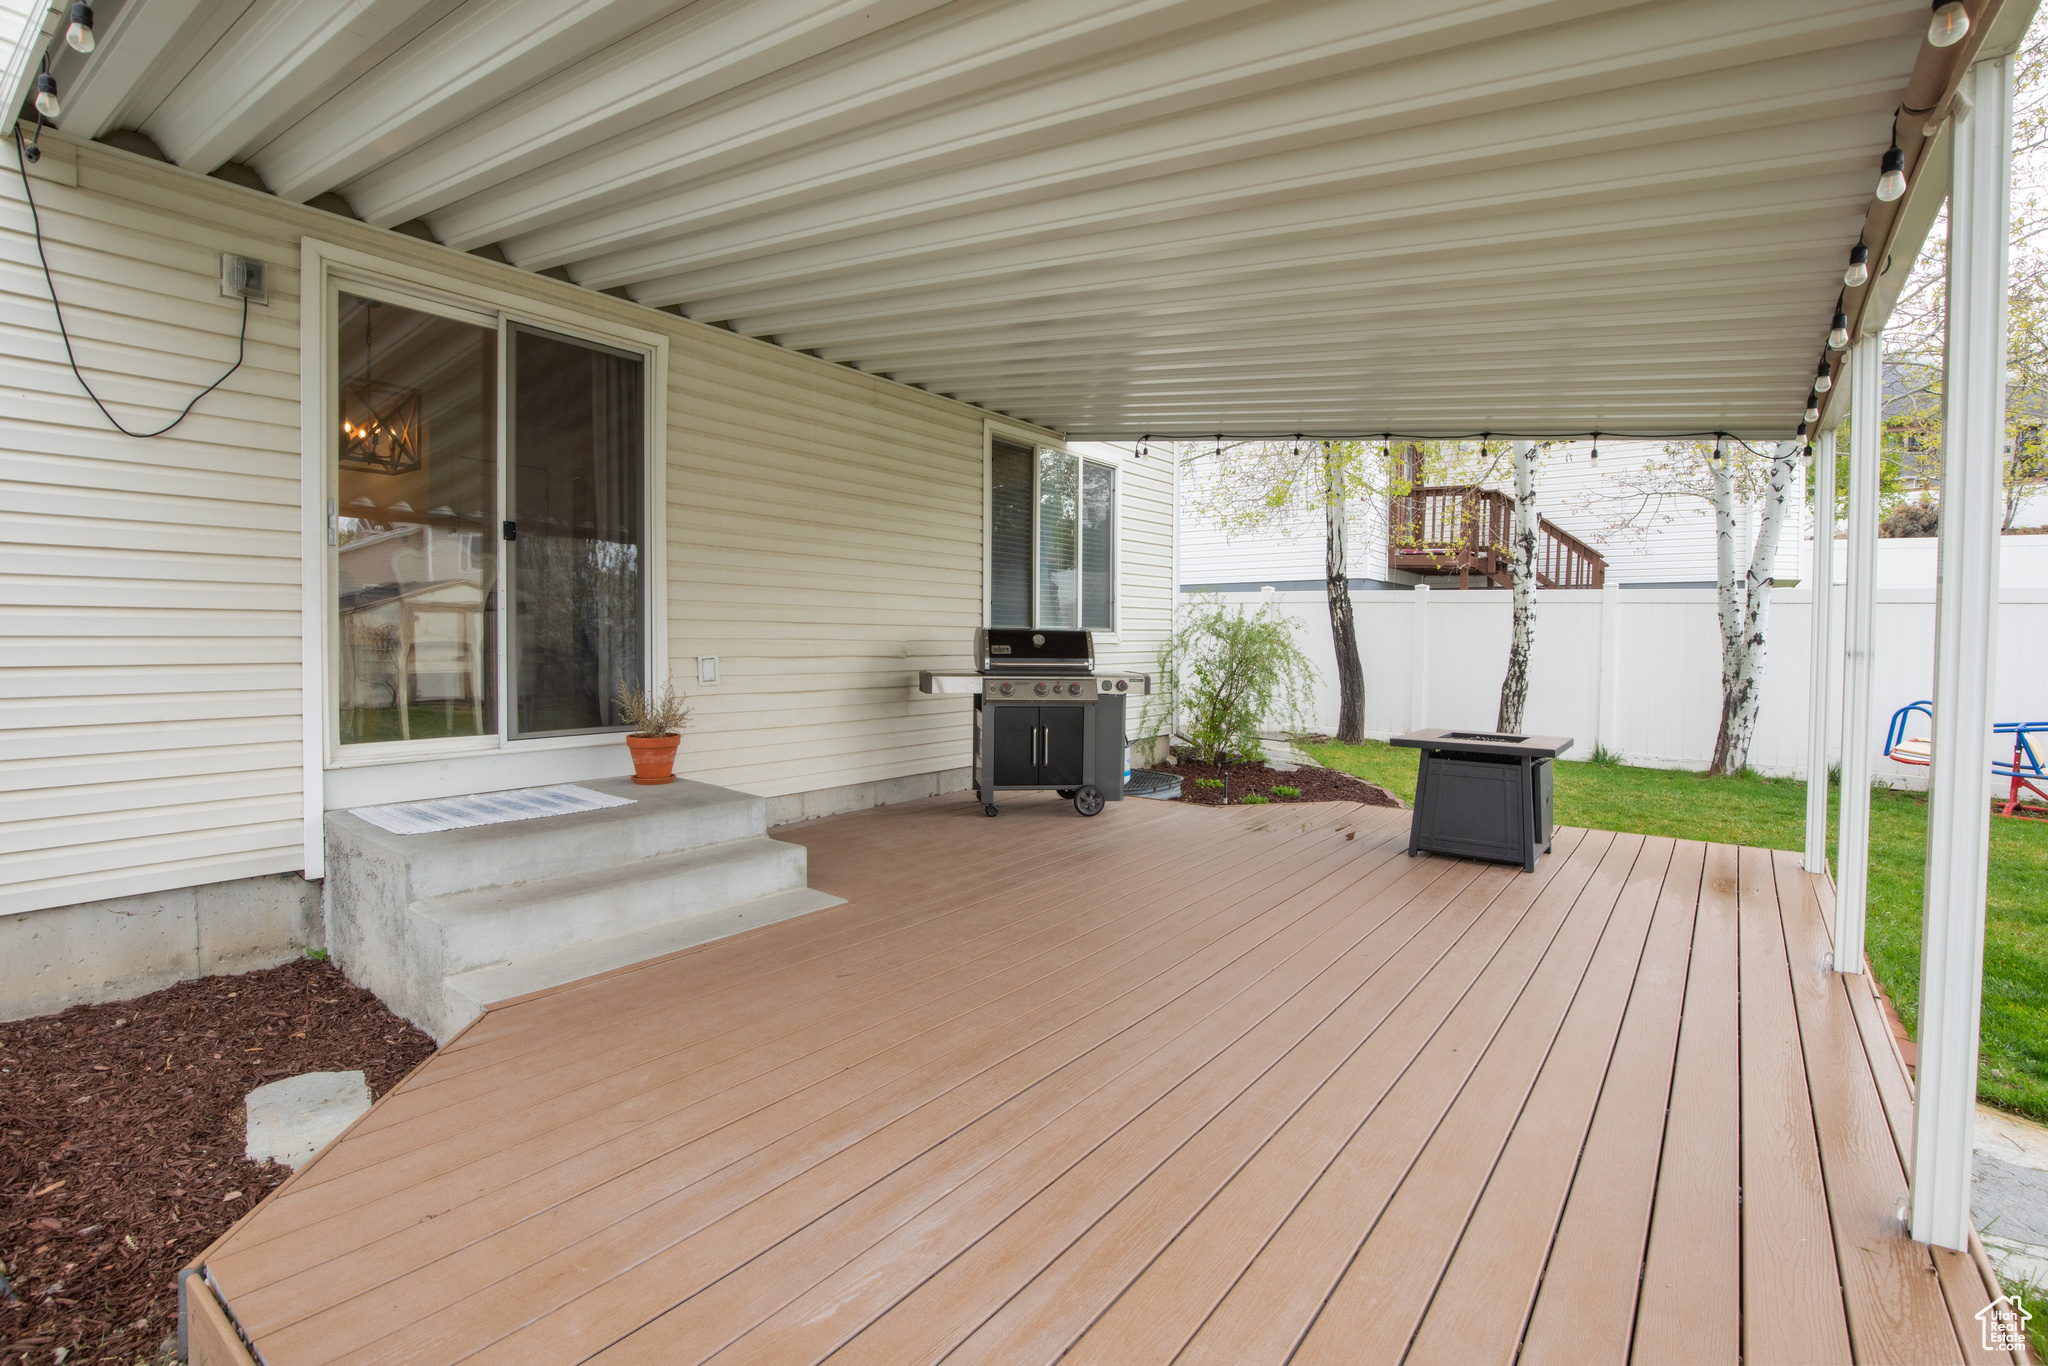 Deck featuring area for grilling